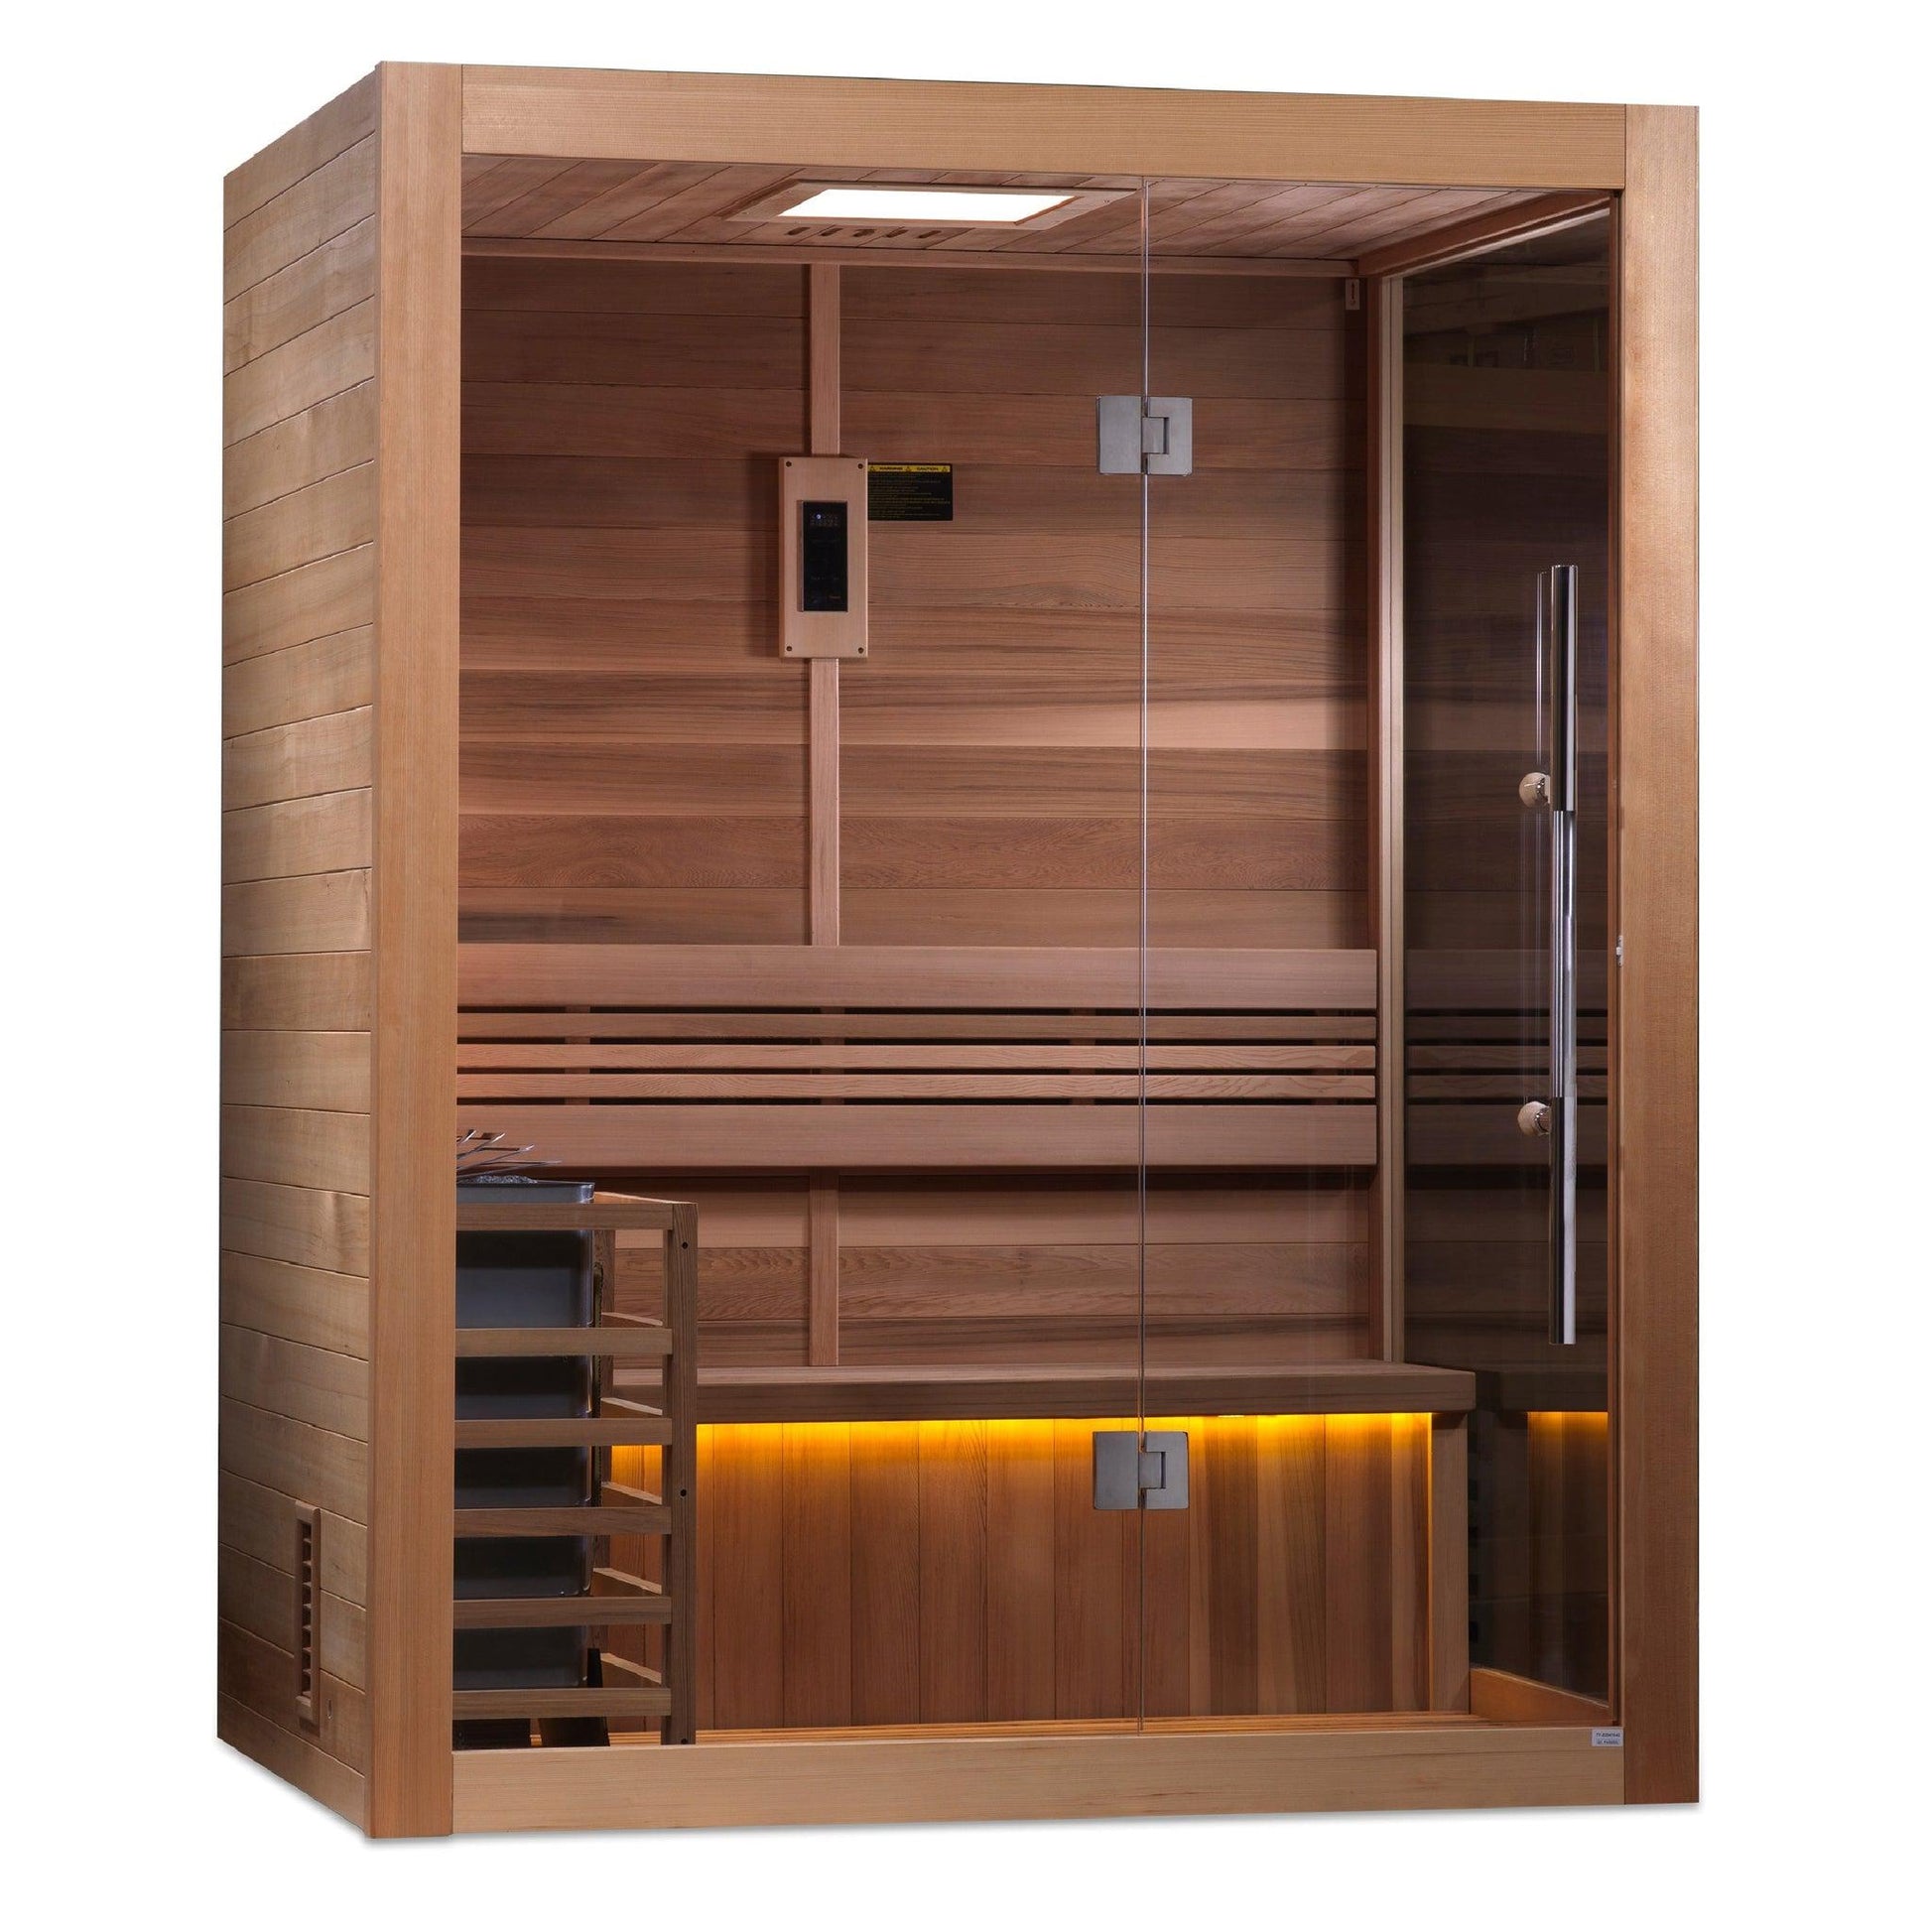 Golden Designs Hanko Edition 2-Person Indoor Traditional Steam Sauna All Glass Front and Wooden Right Side Wall in Canadian Red Cedar Interior and Hemlock Exterior